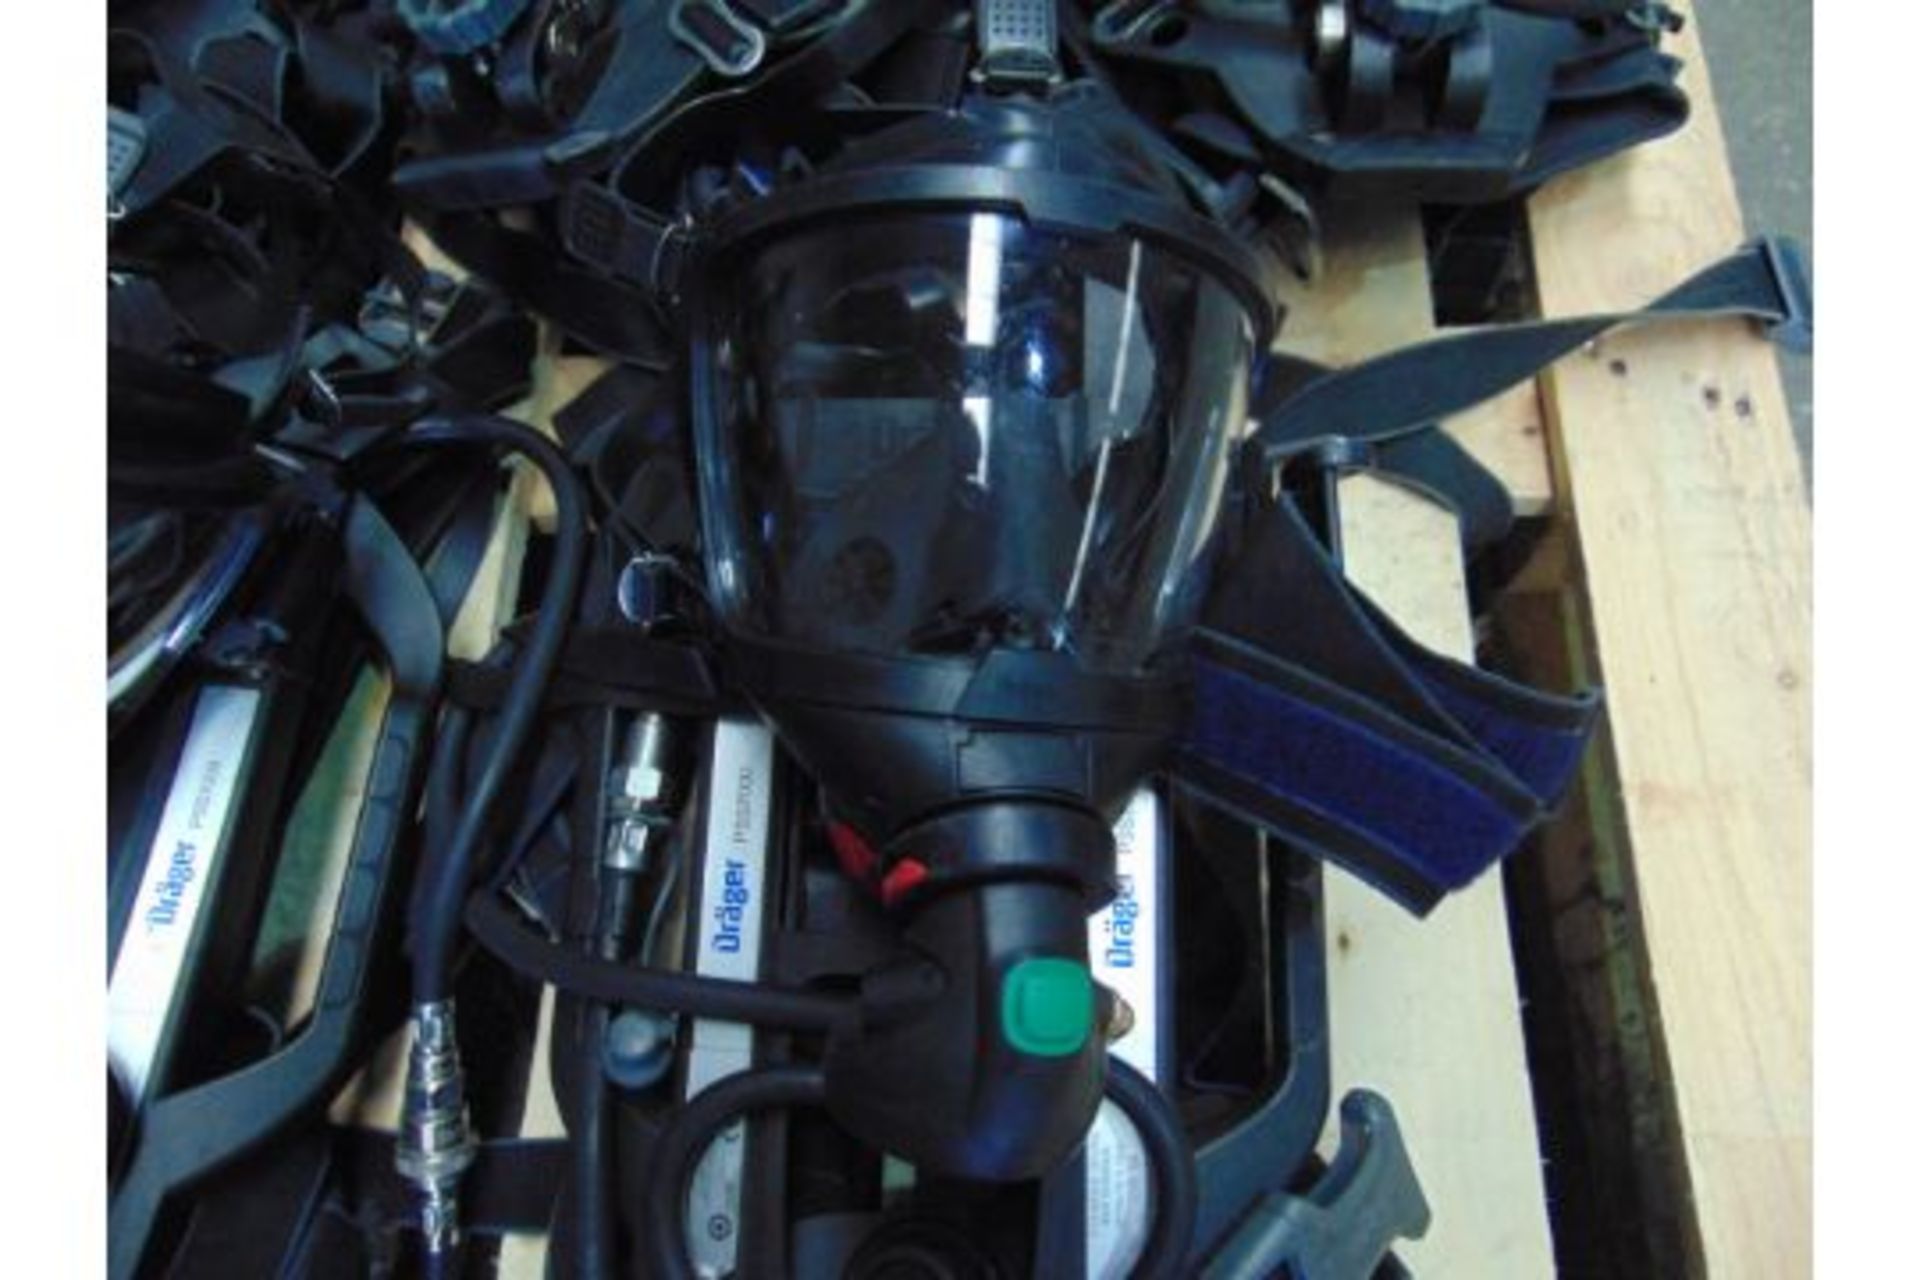 5 x Drager PSS 7000 Self Contained Breathing Apparatus w/ 10 x Drager 300 Bar Air Cylinders - Image 11 of 28